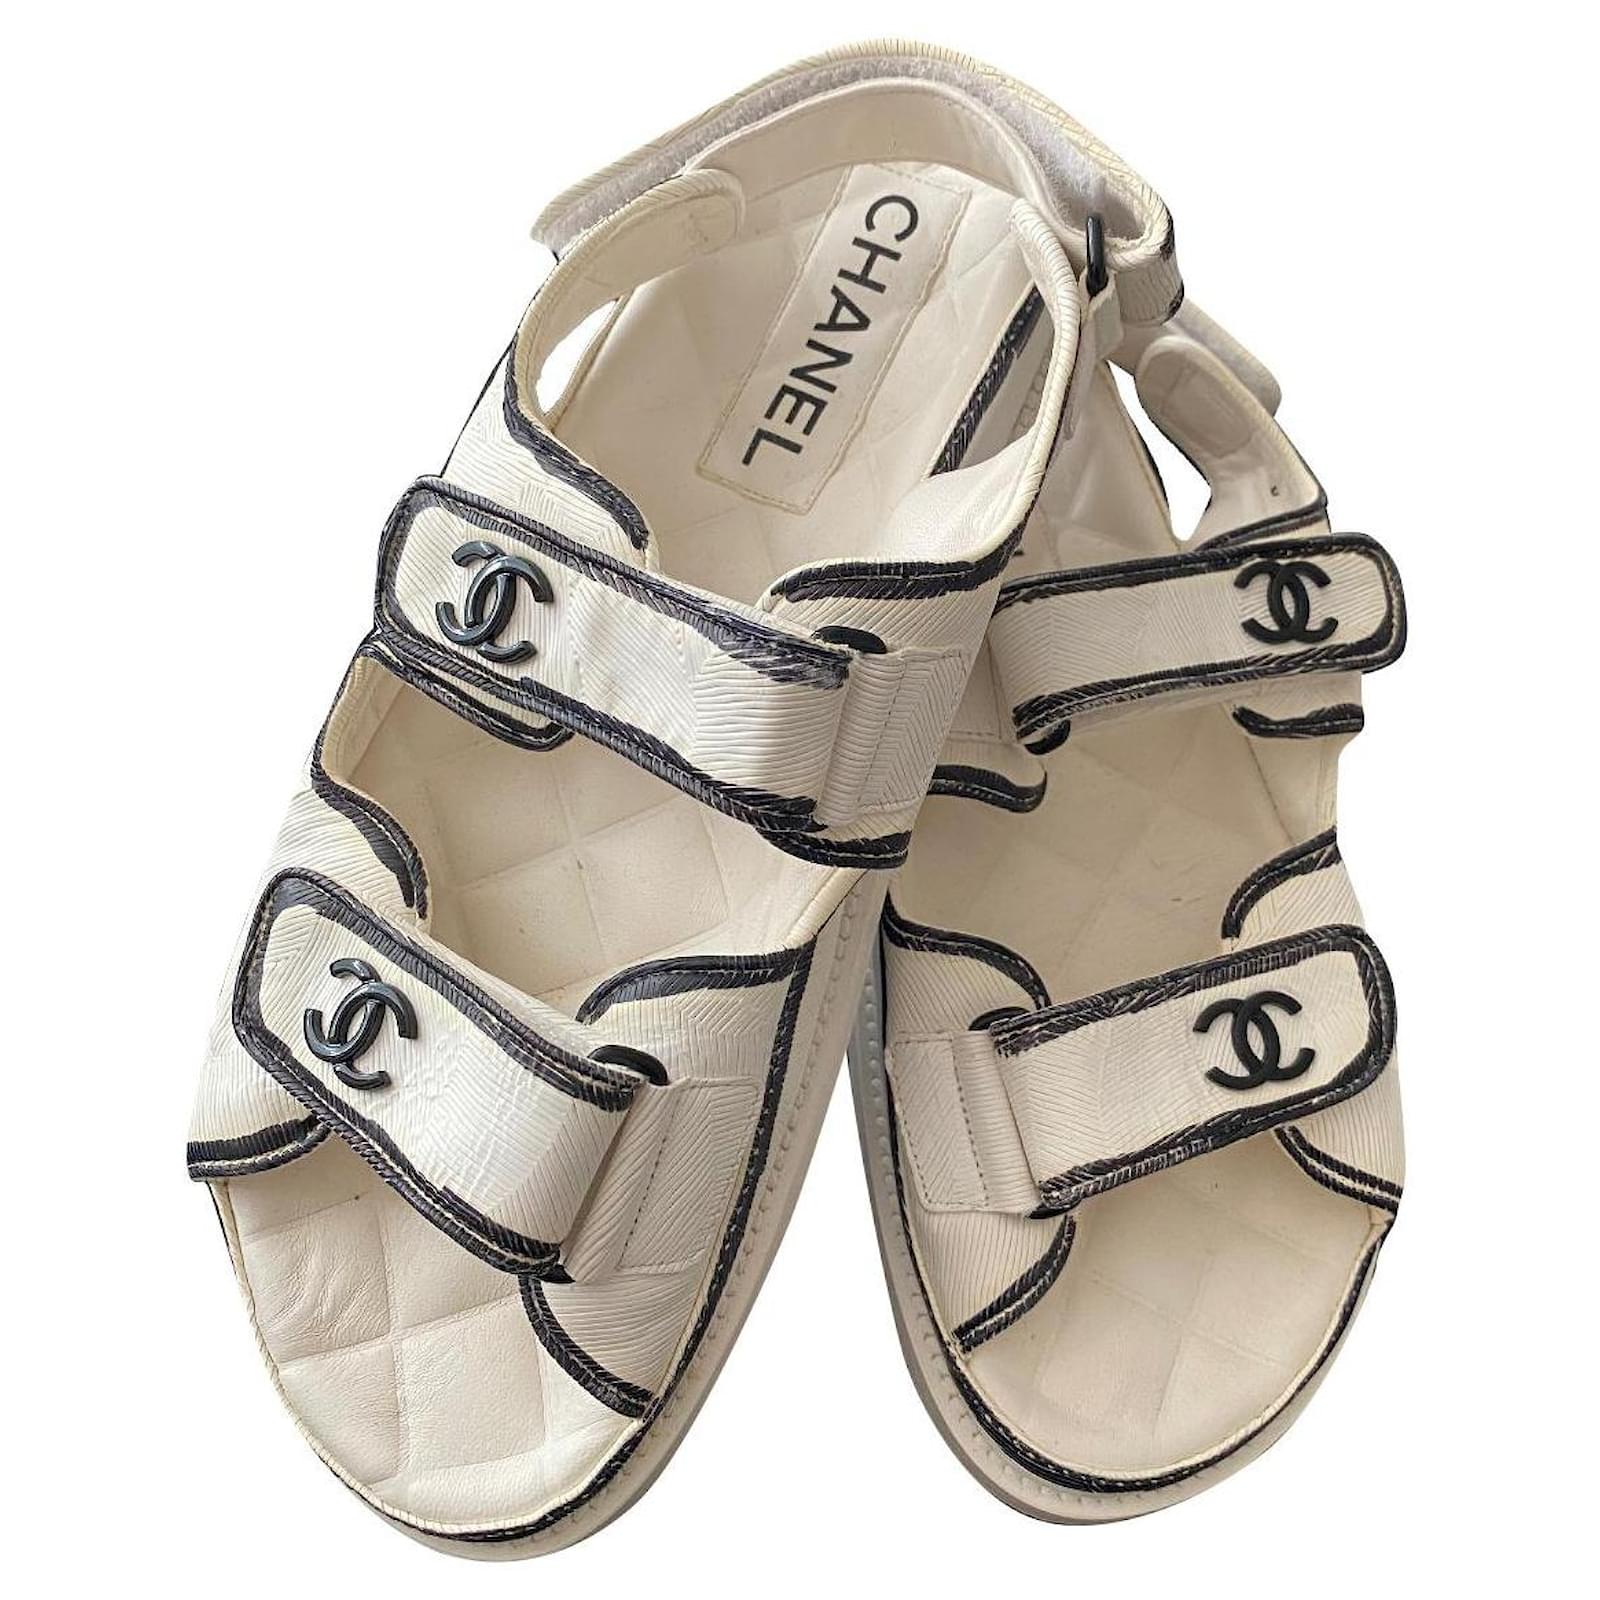 Chanel Leather Sandals